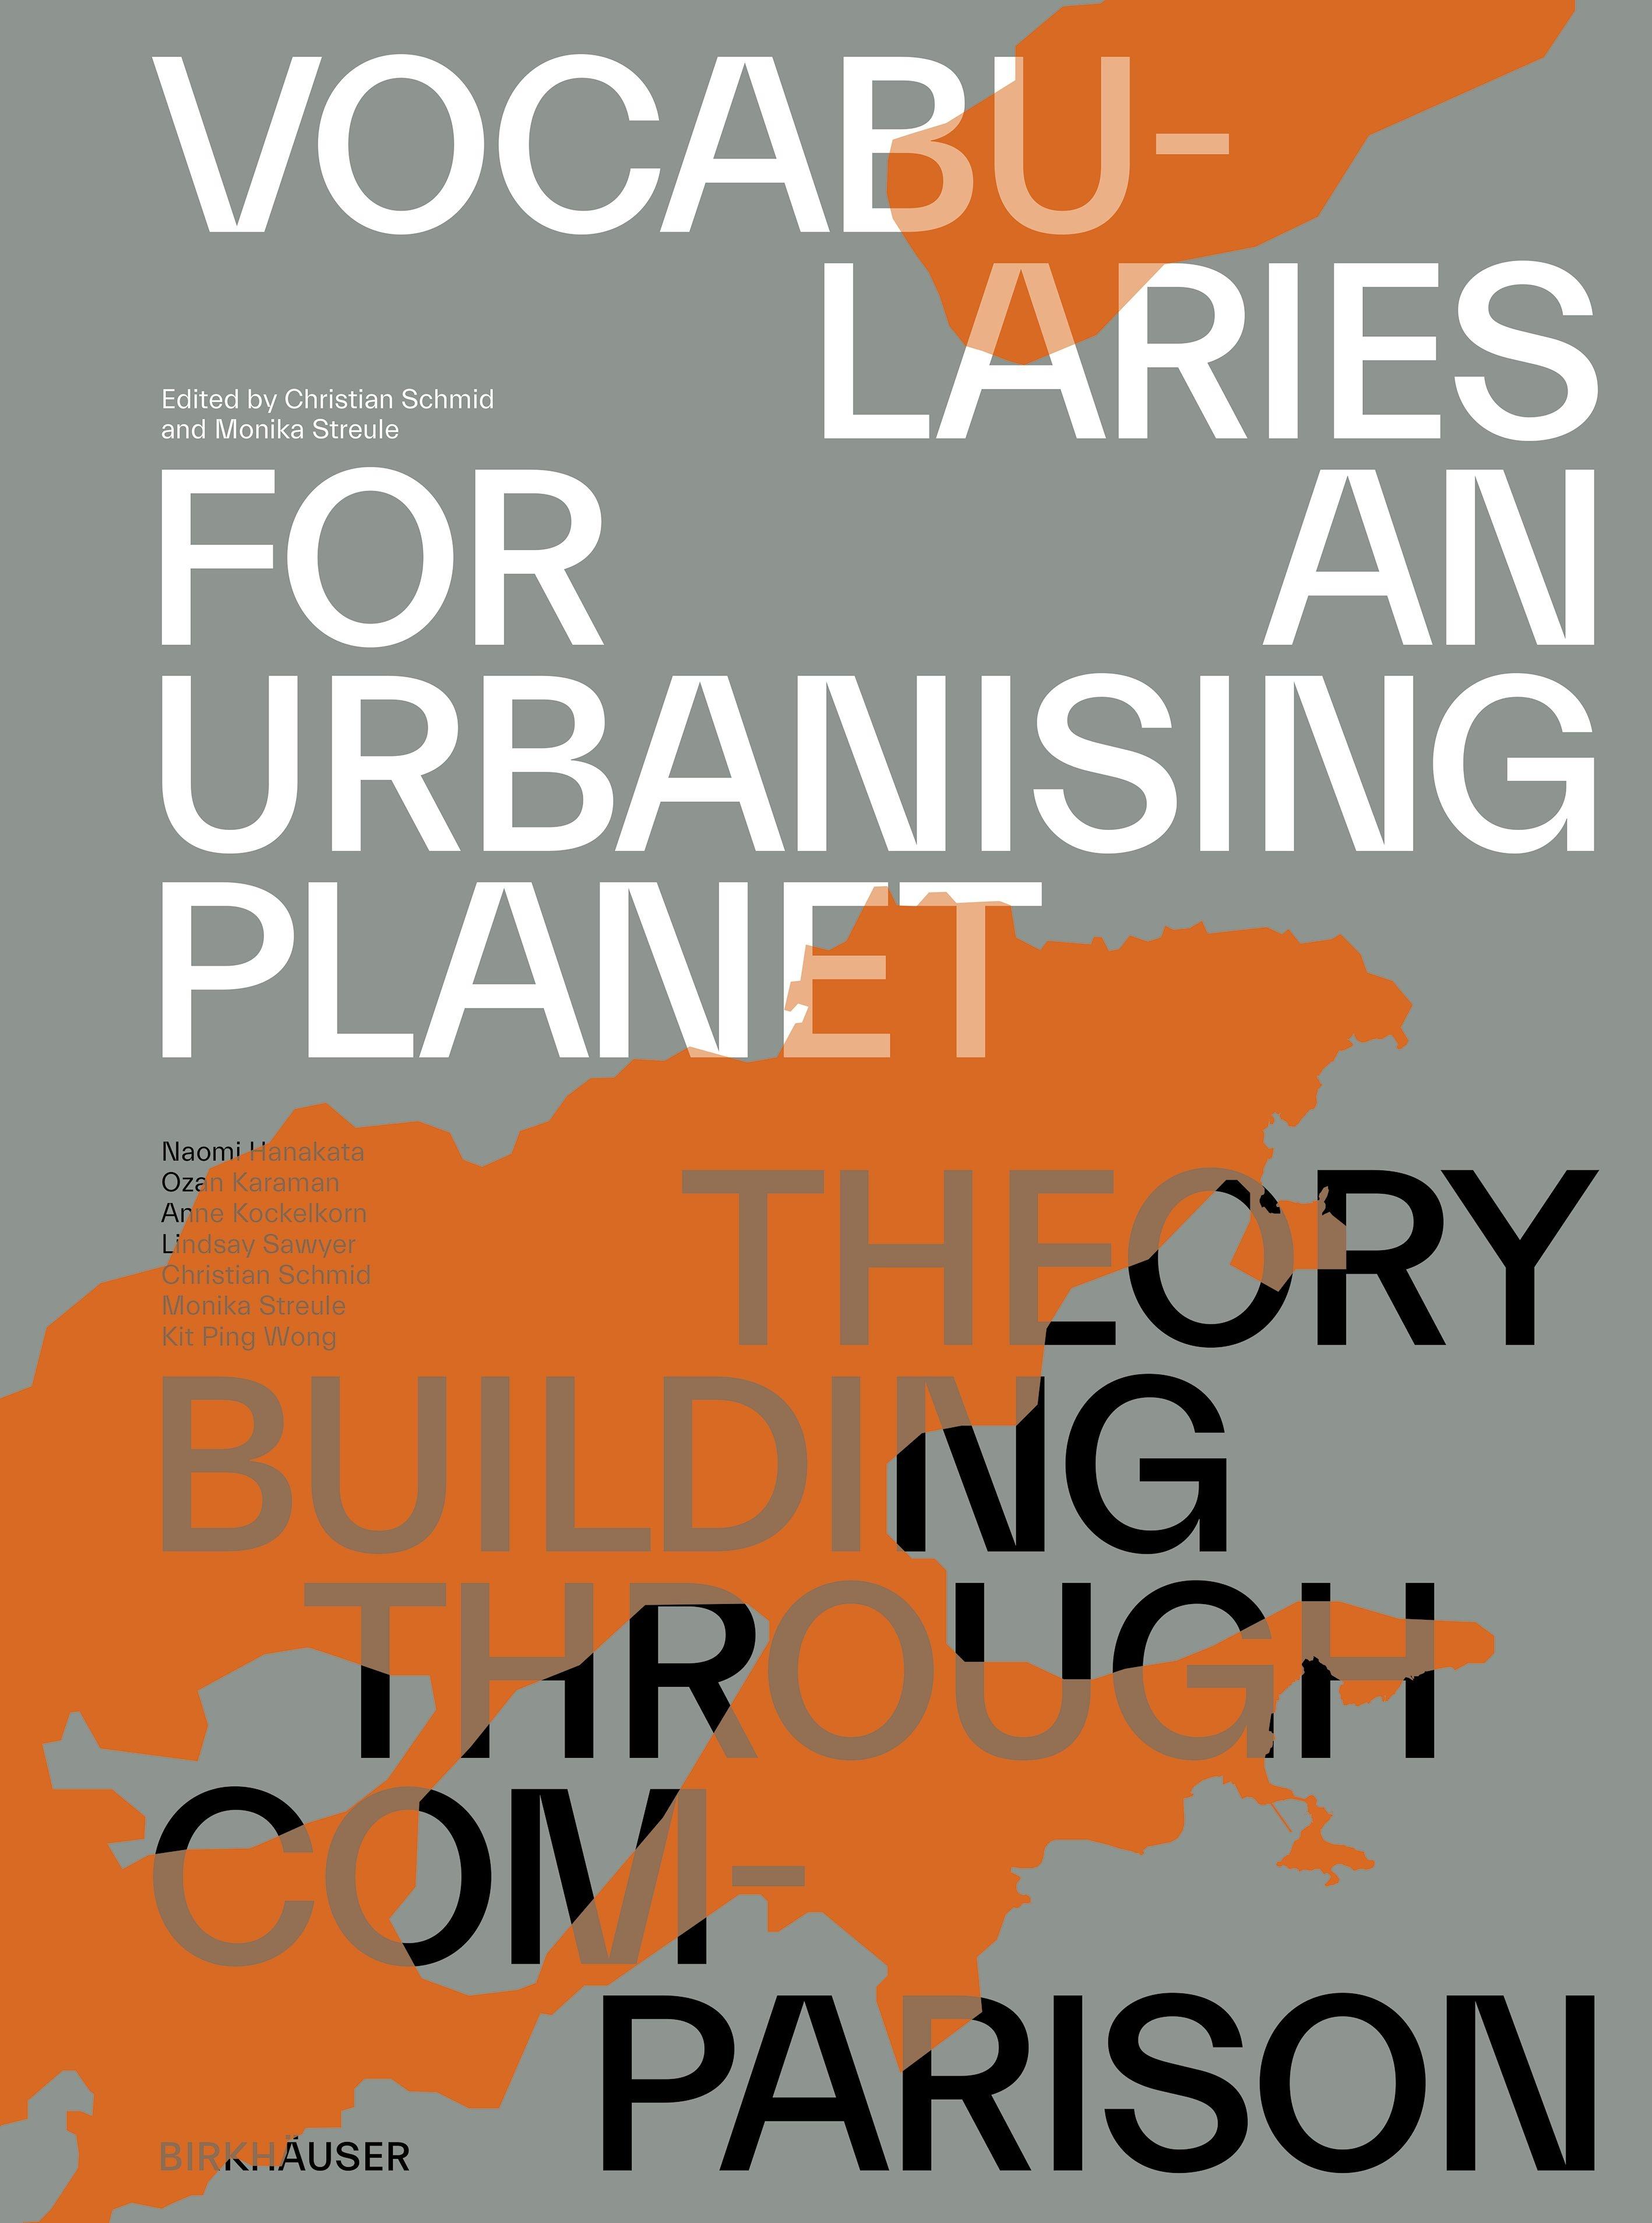 VOCABULARIES FOR AN URBANISING PLANET: THEORY BUILDING THROUGH COMPARISON